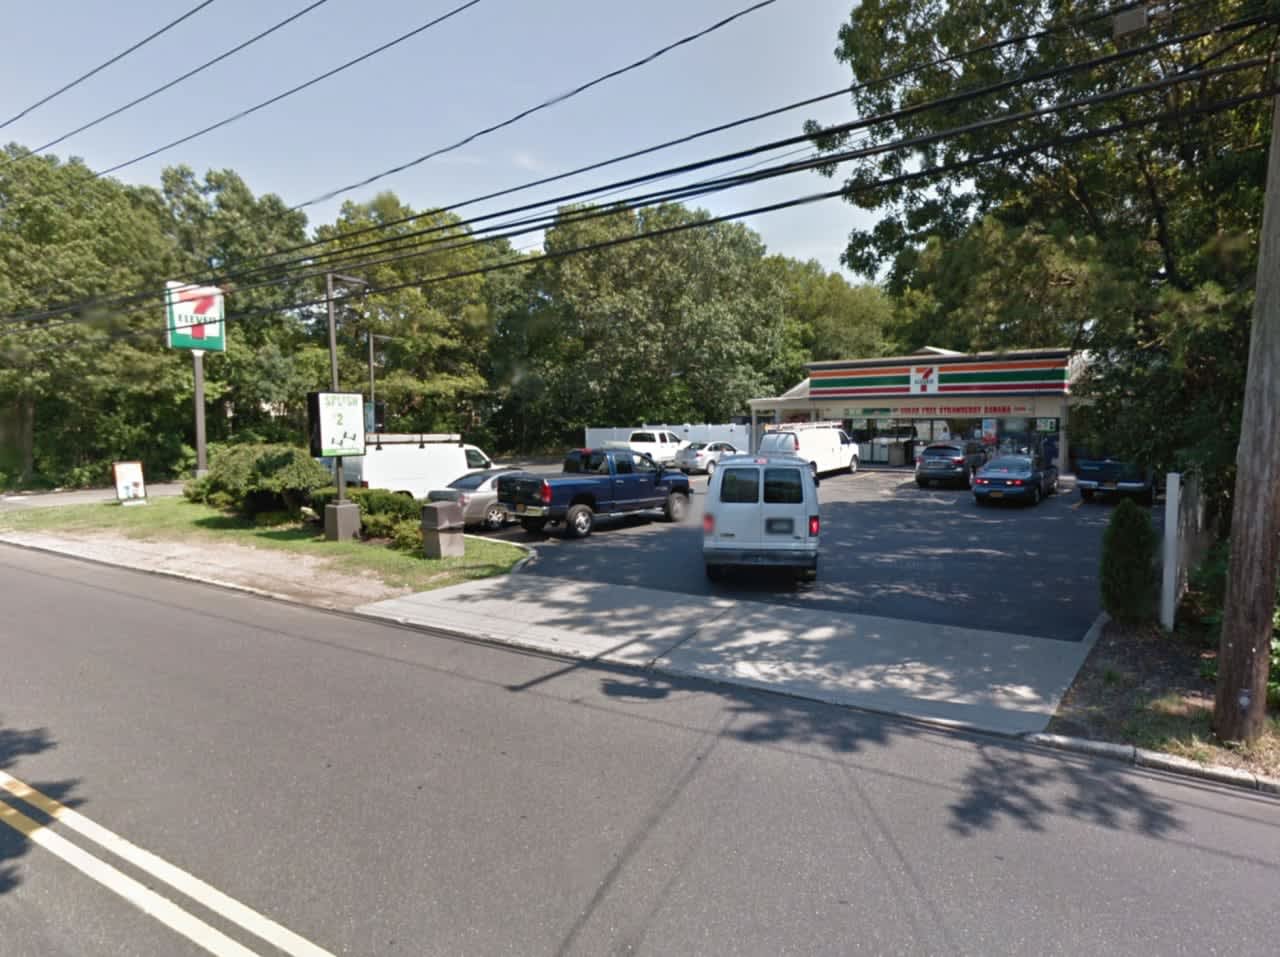 A woman robbed 7-Eleven on Peconic Street in Ronkonkoma at knifepoint, police said.